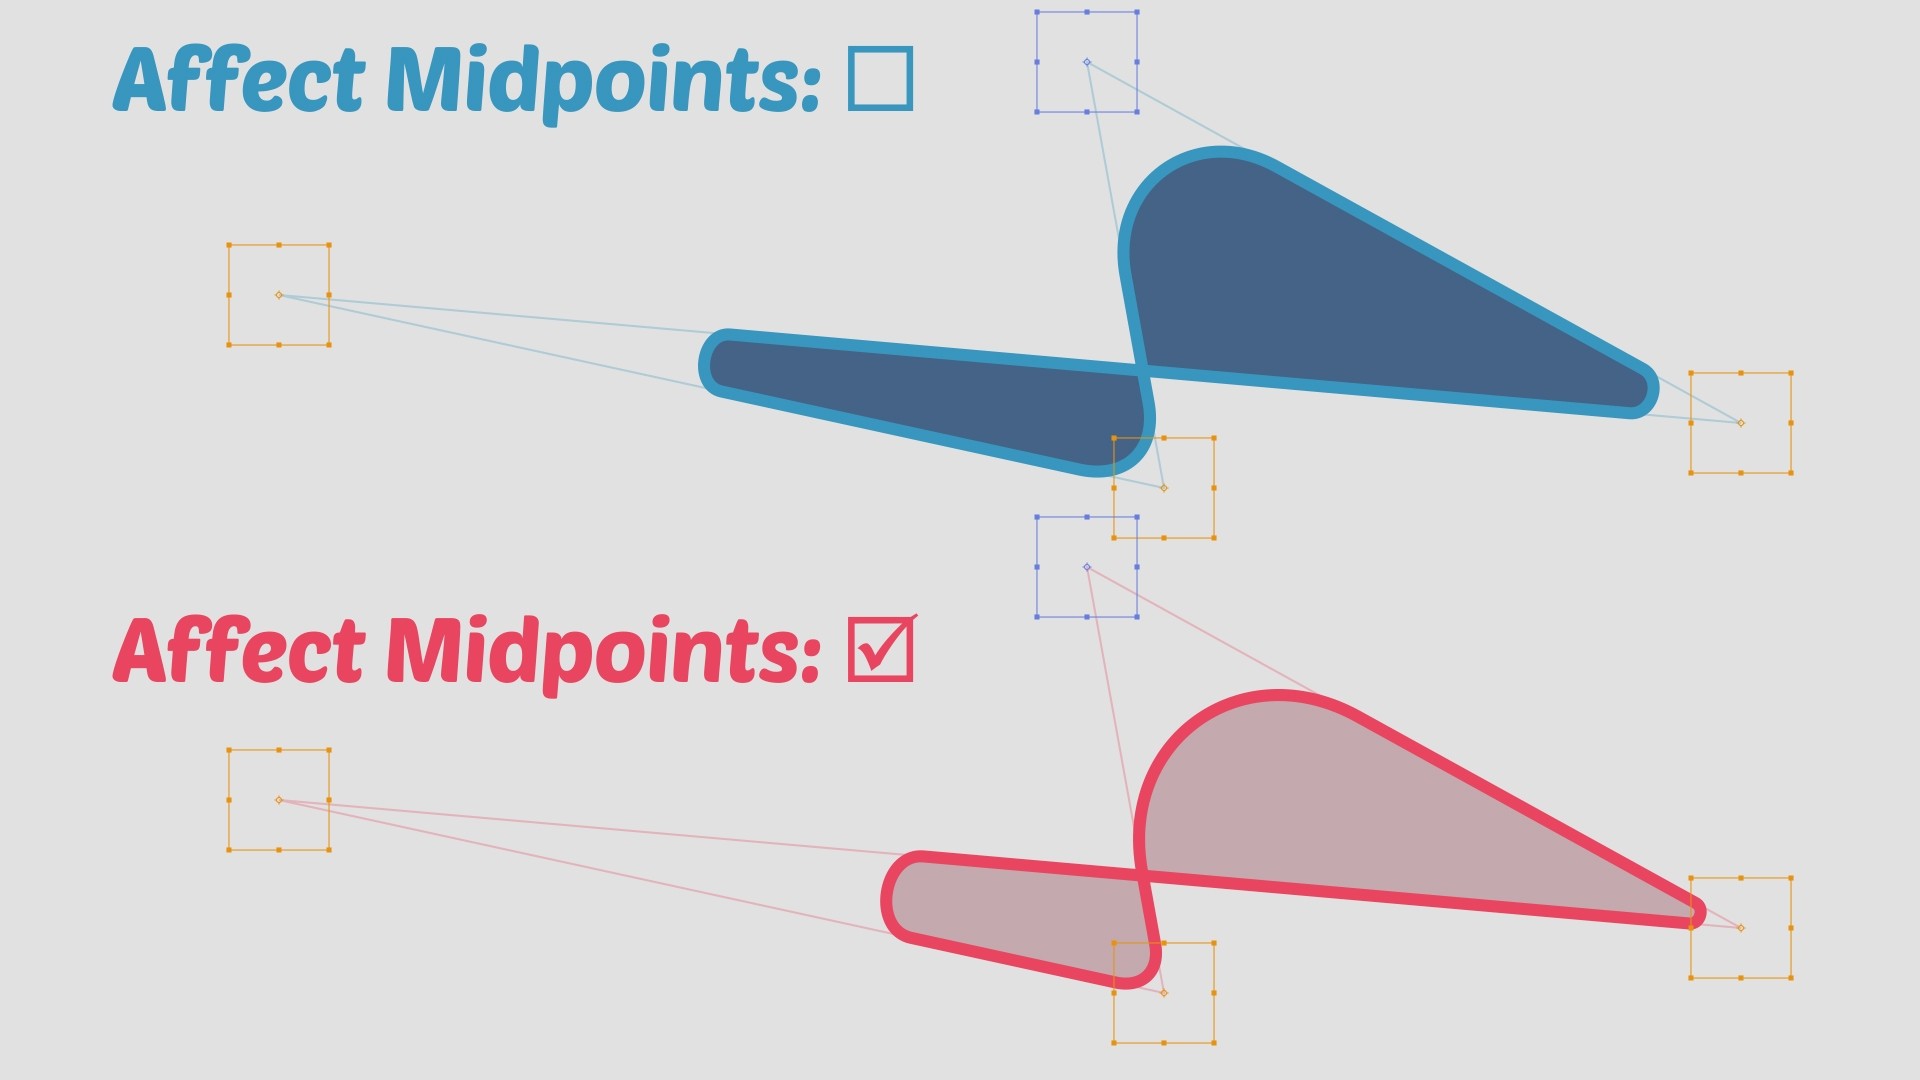 Affect Midpoint